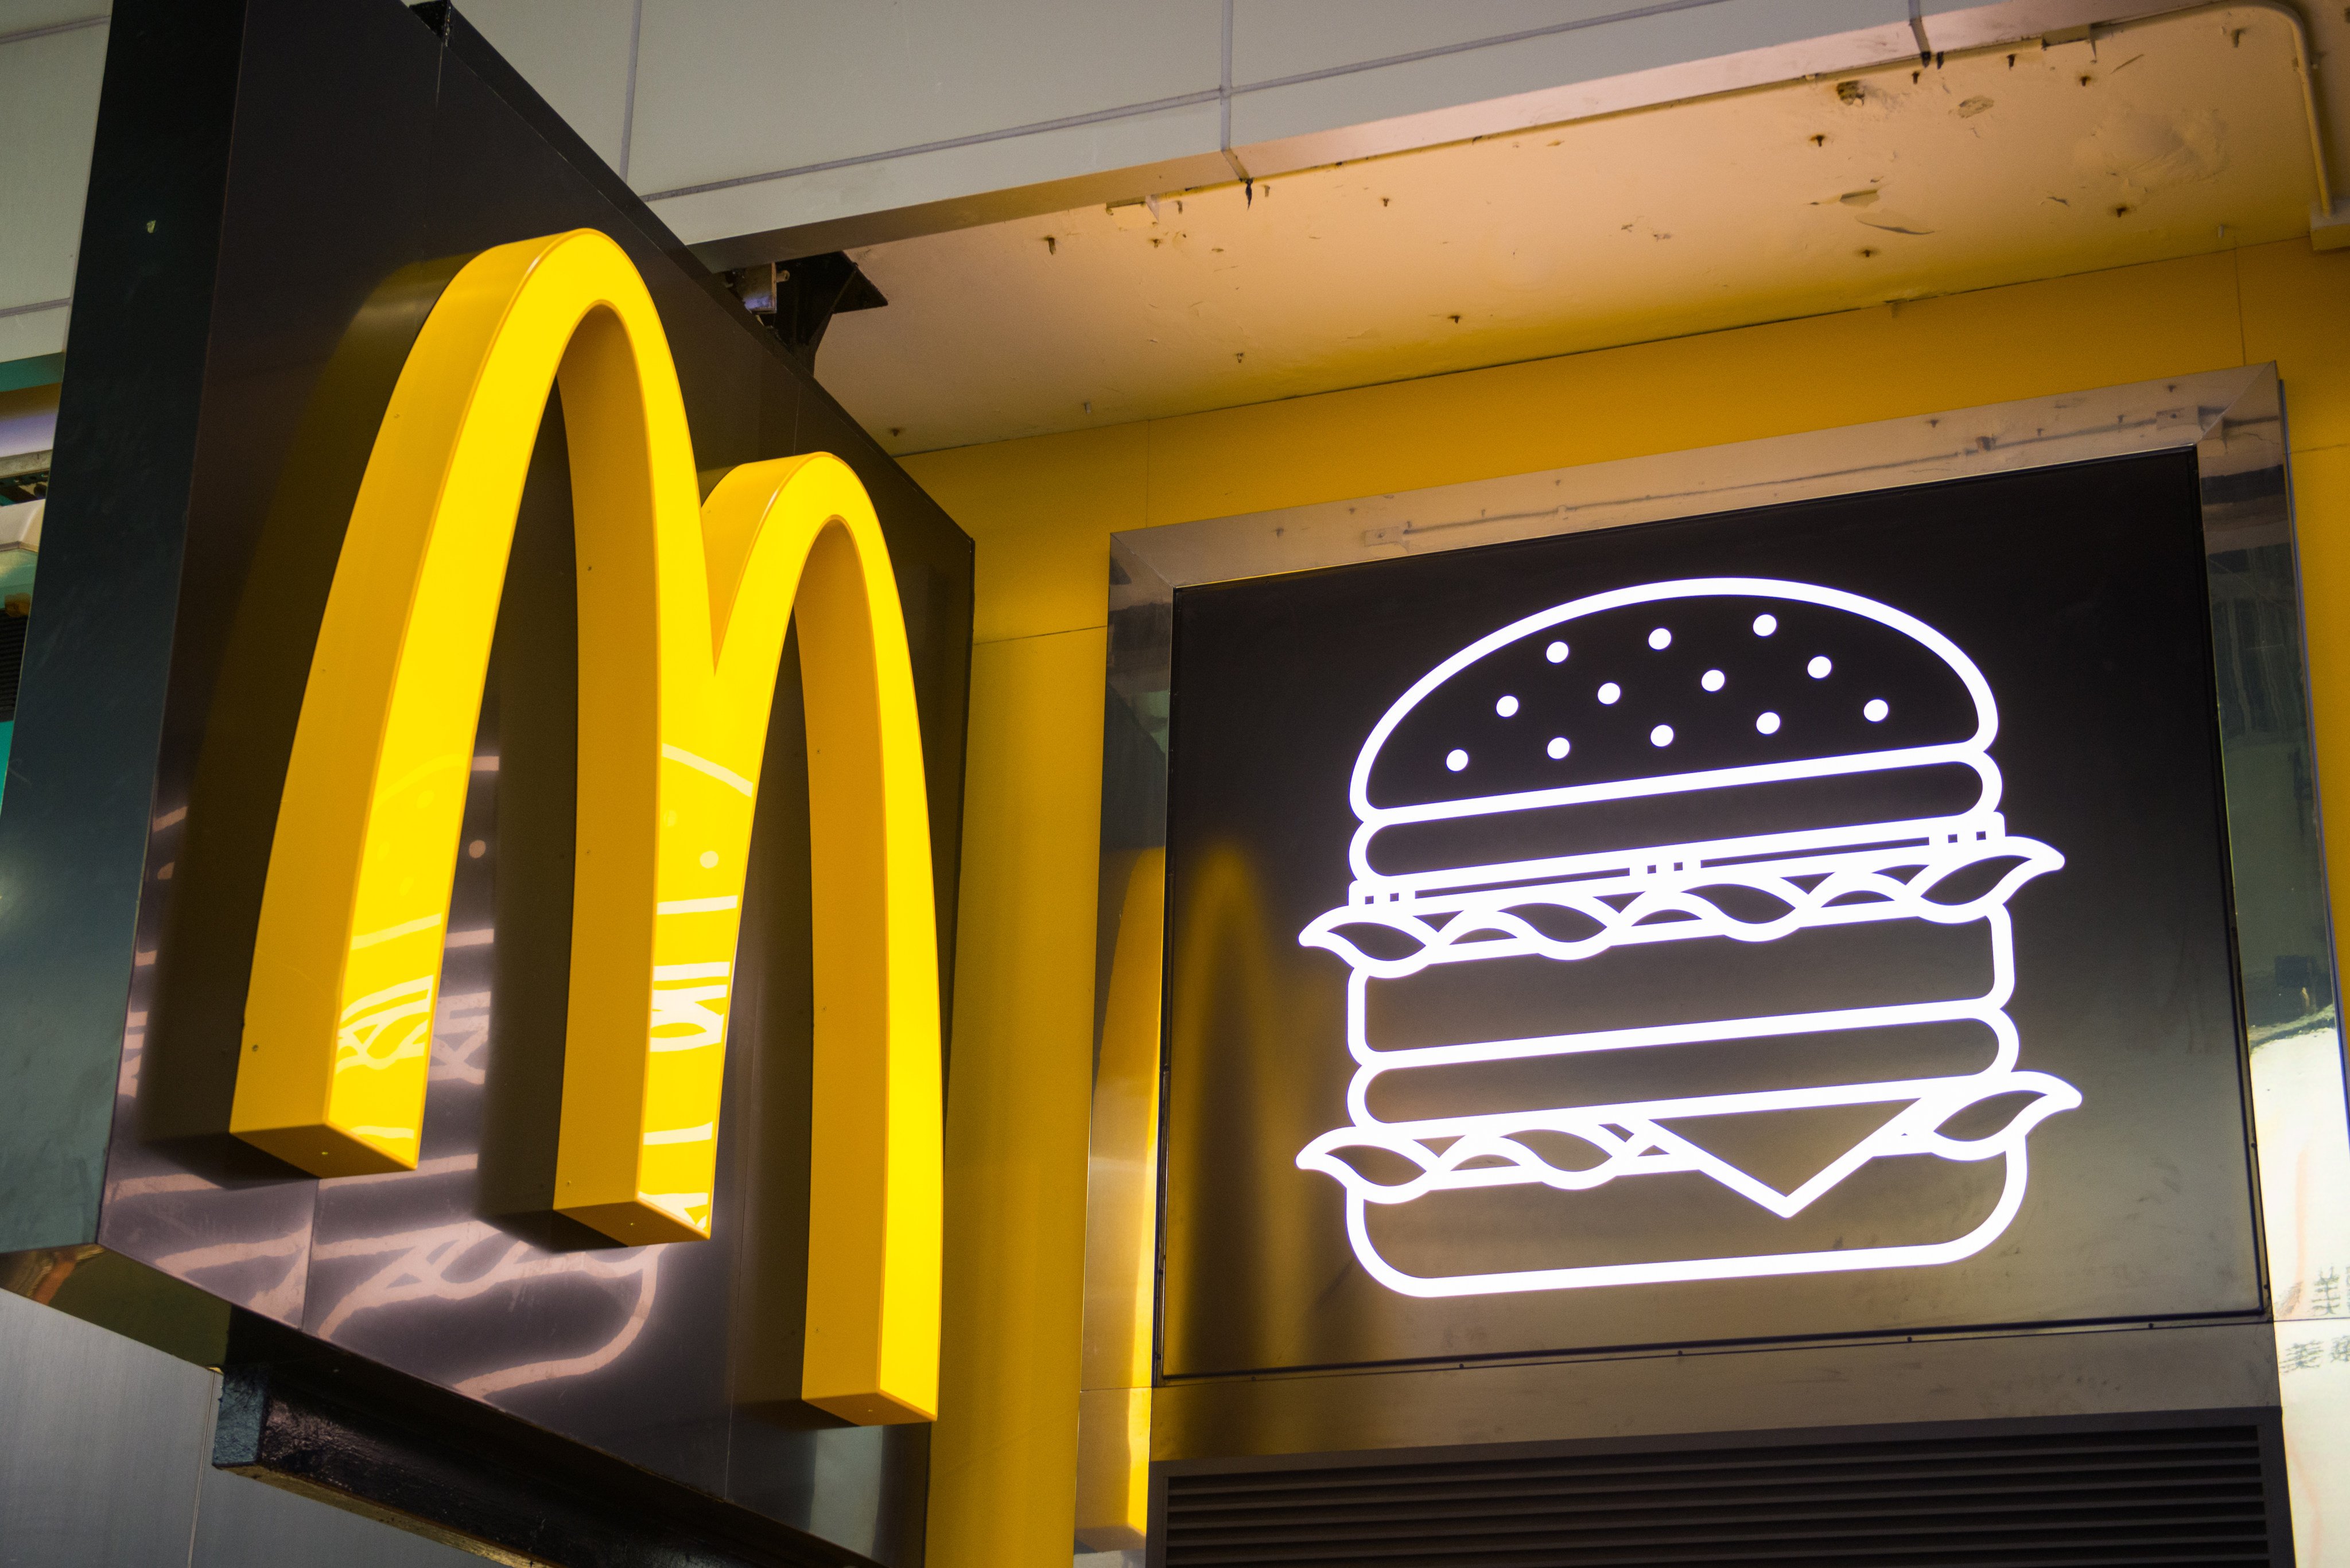 The Indian state of Maharashtra will inspect numerous global fast food chains, after state authorities found some McDonald’s products made use of so-called cheese analogues of vegetable oil, instead of real cheese. Photo: Shutterstock